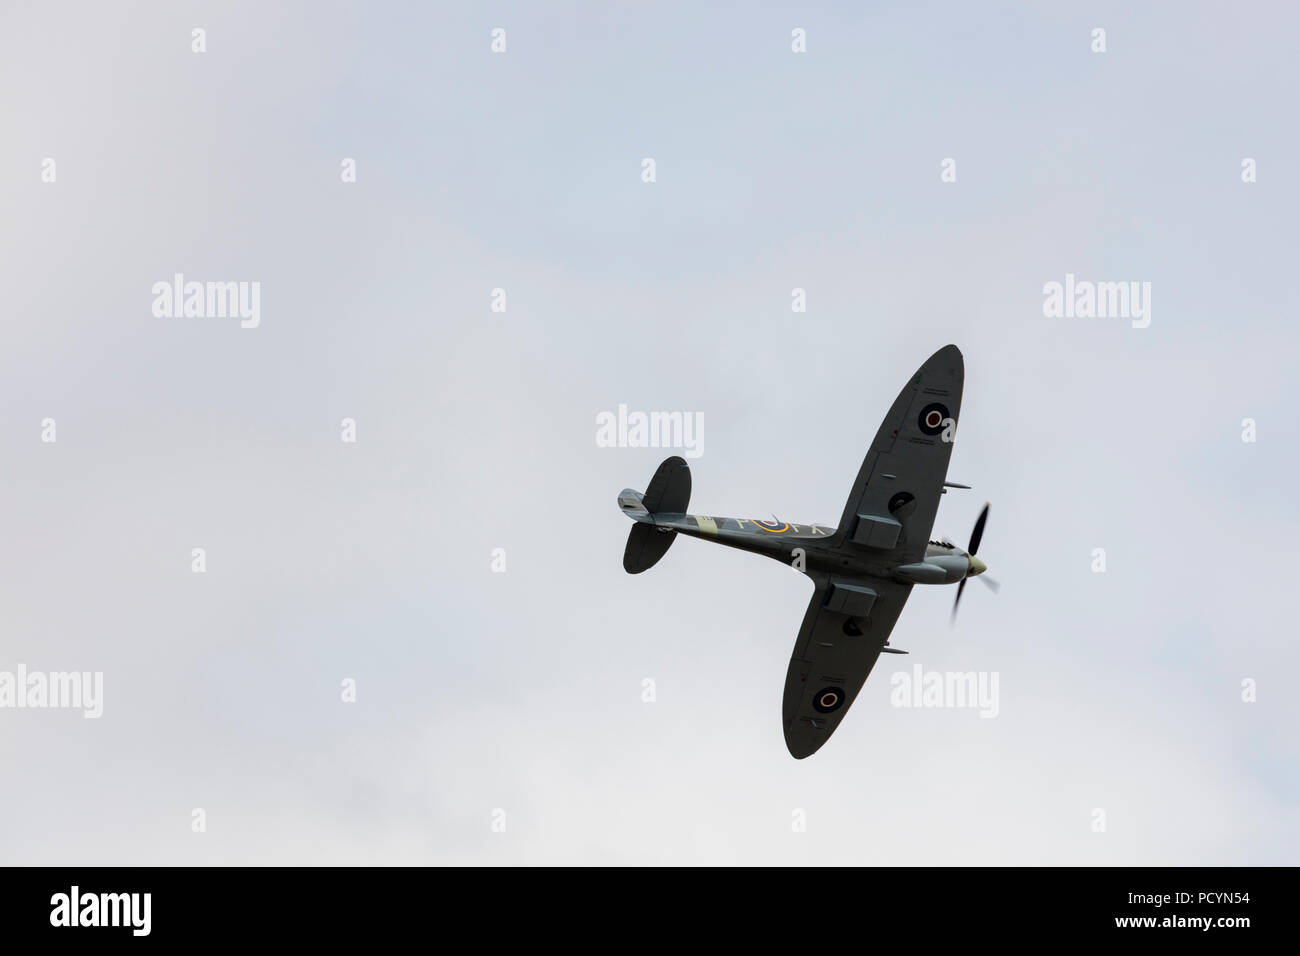 Underside view of a historic RAF Spitfire aeroplane in flight Stock Photo